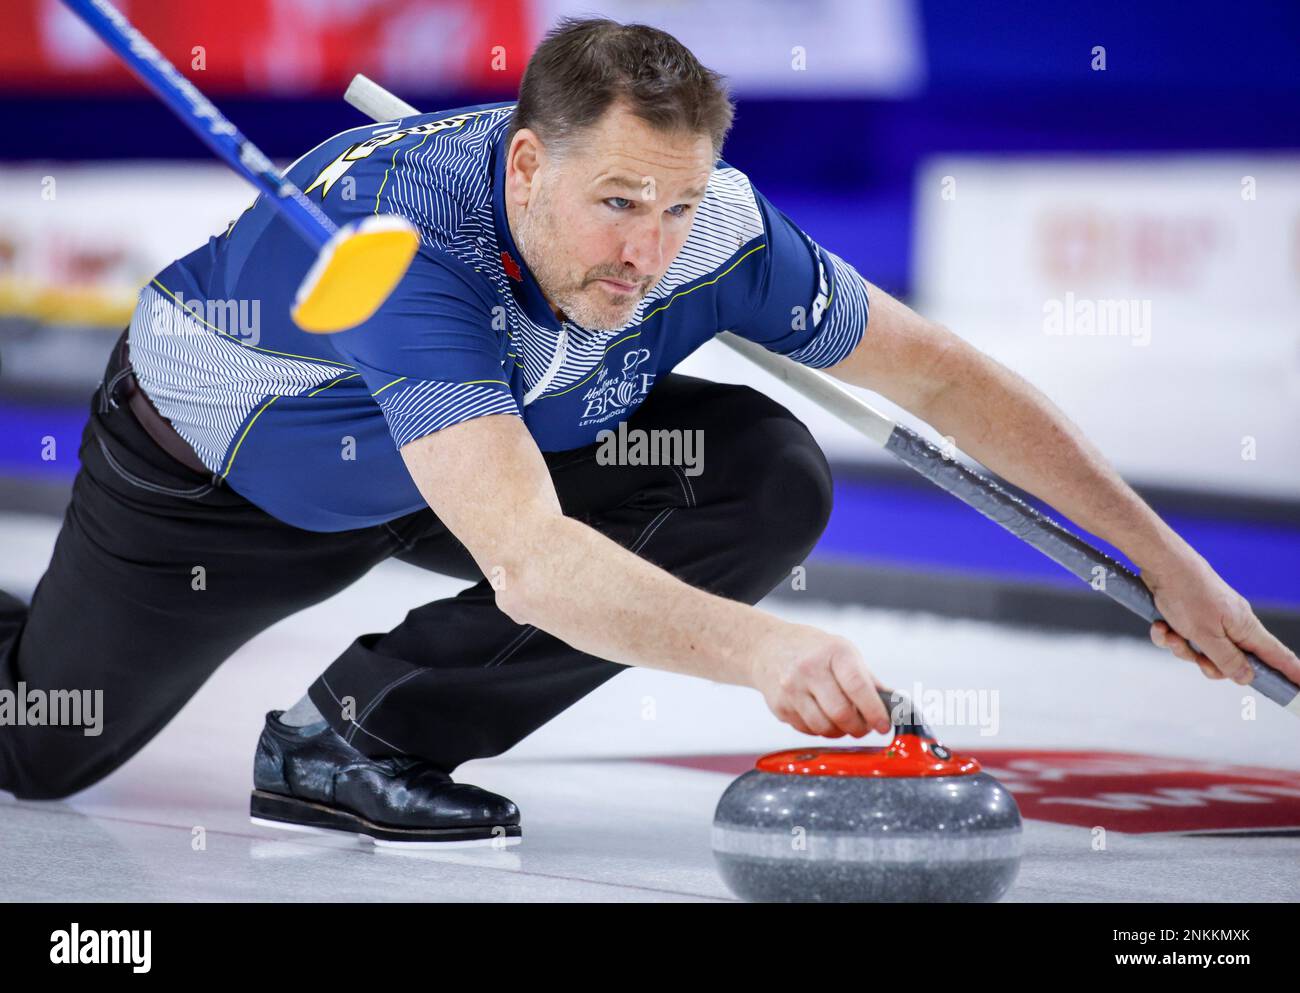 Team Nova Scotia skip Paul Flemming makes a shot while playing Team British Columbia at the Tim Hortons Brier curling event in Lethbridge, Alberta, Tuesday, March 8, 2022